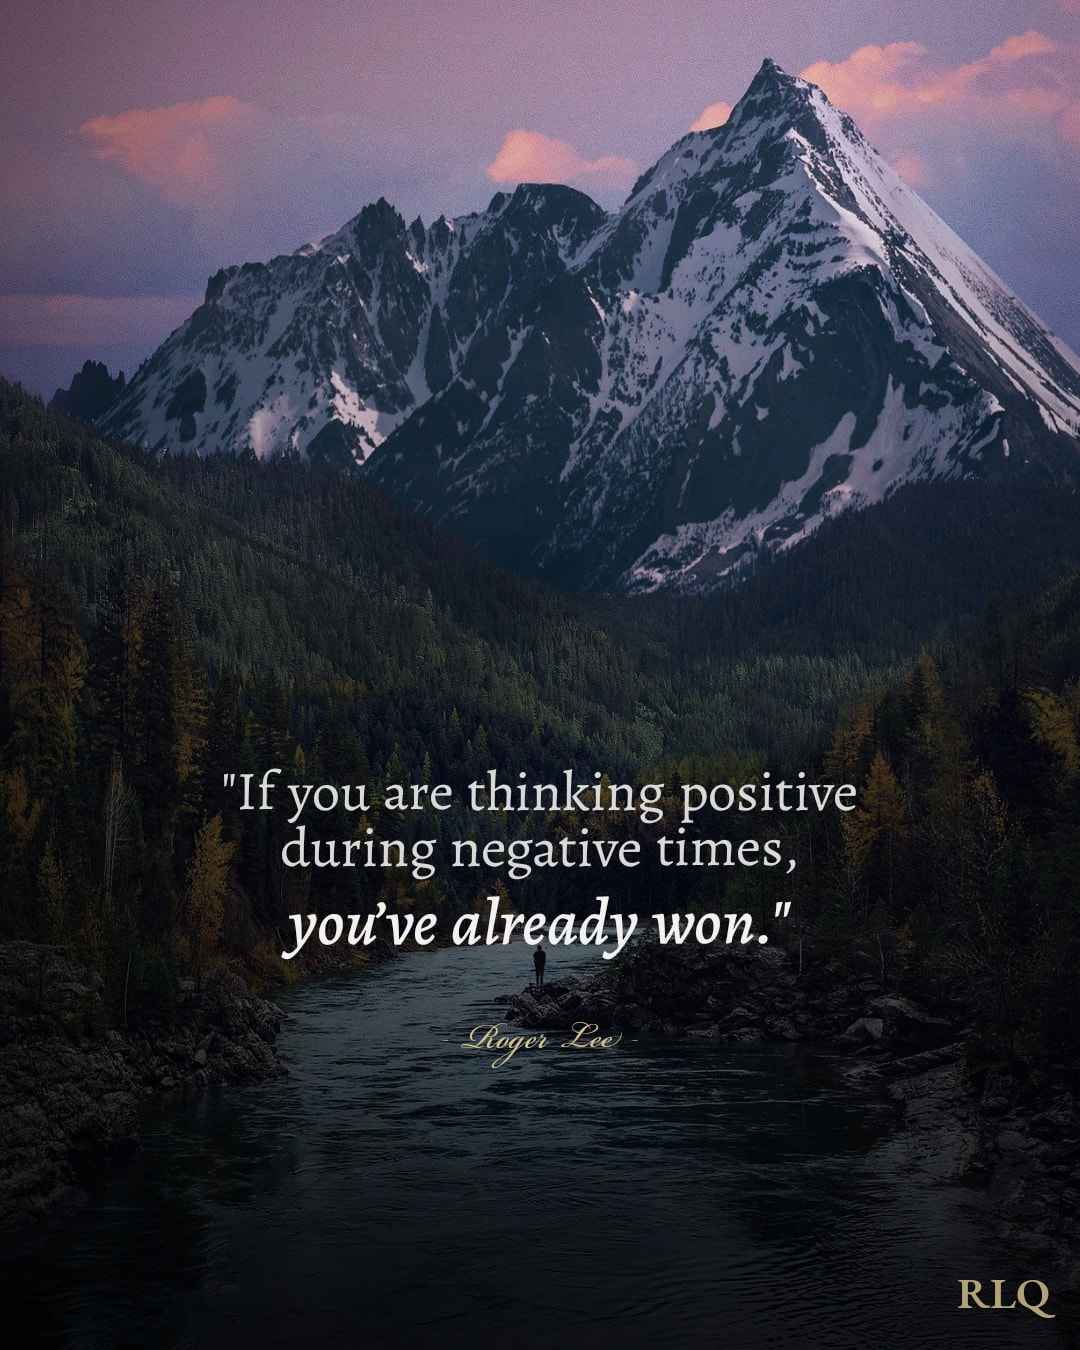 If you are thinking positive during negative times, you’ve already won.